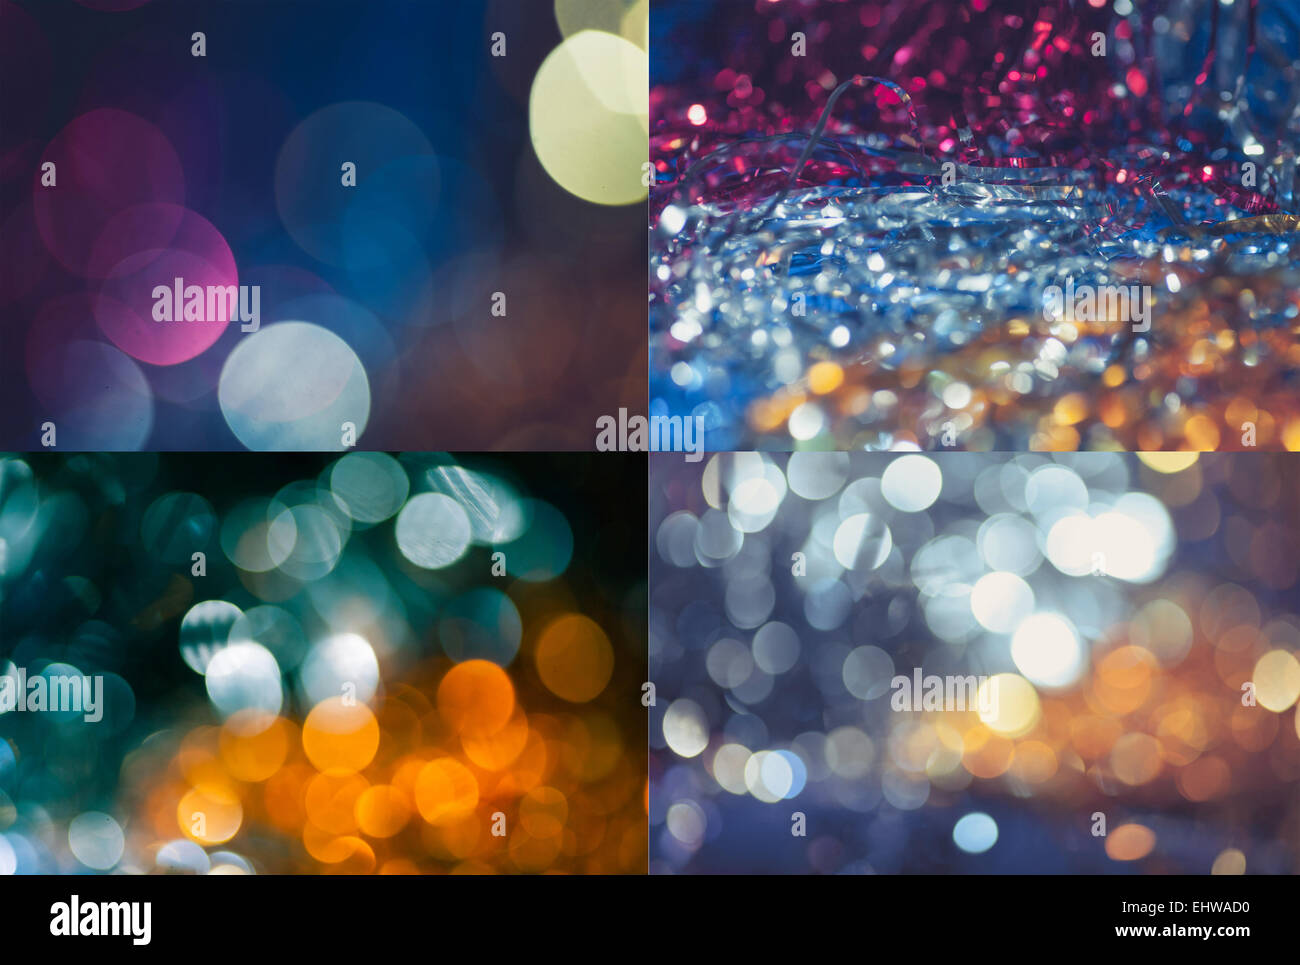 set of holiday blurred backgrounds Stock Photo